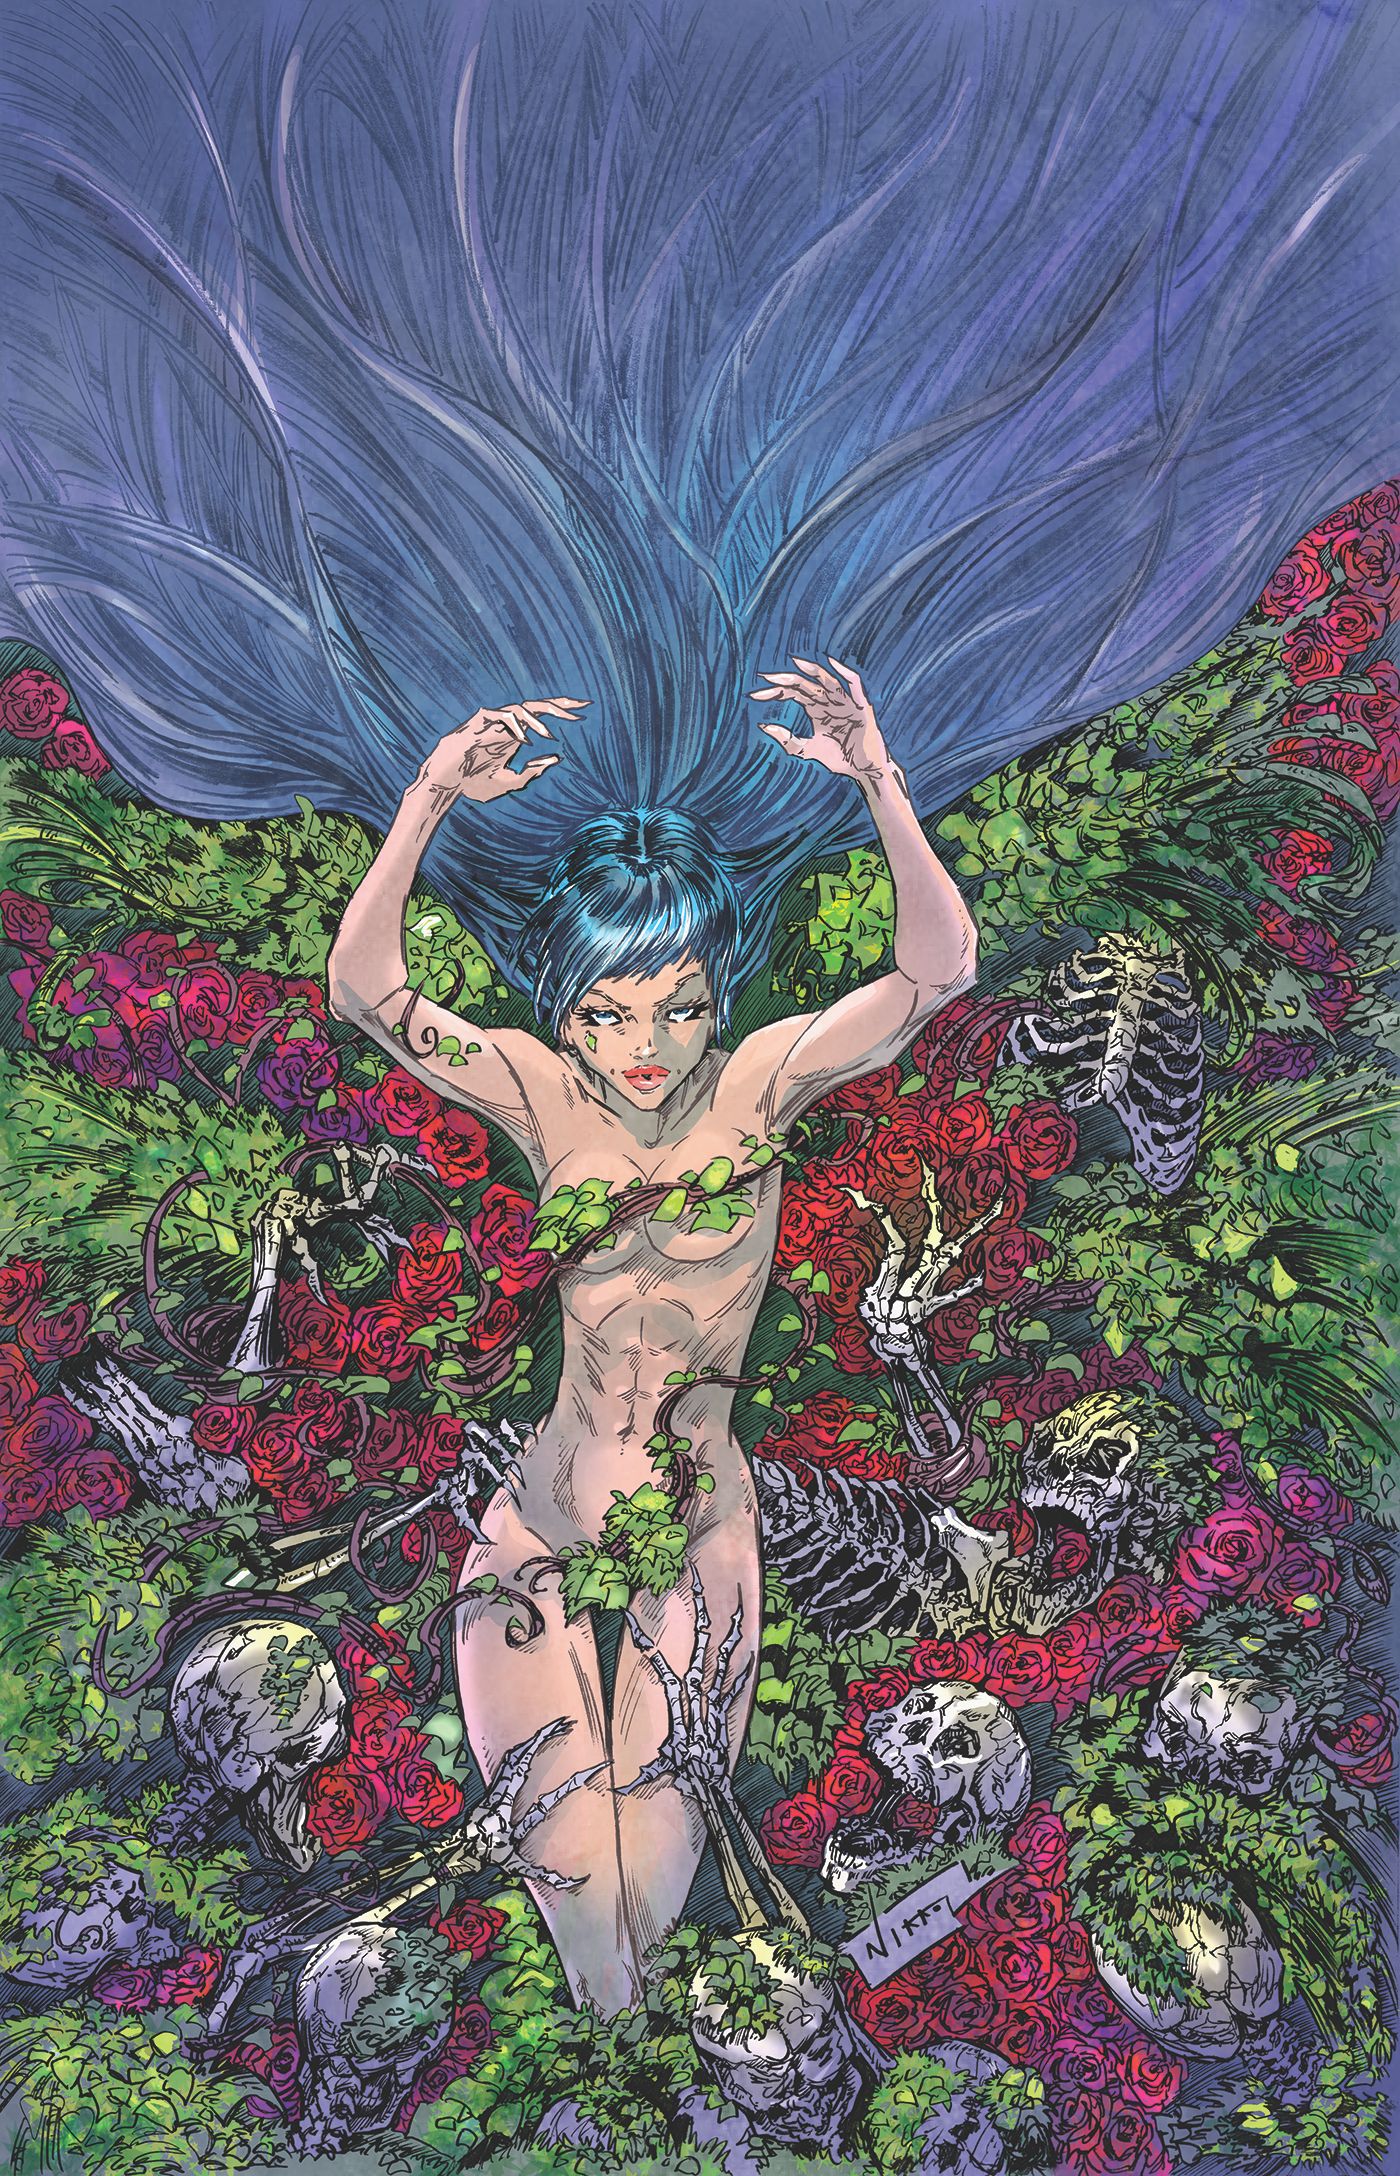 The cover for Midnight Rose by Jim Starlin and Nikkol Jelenic.